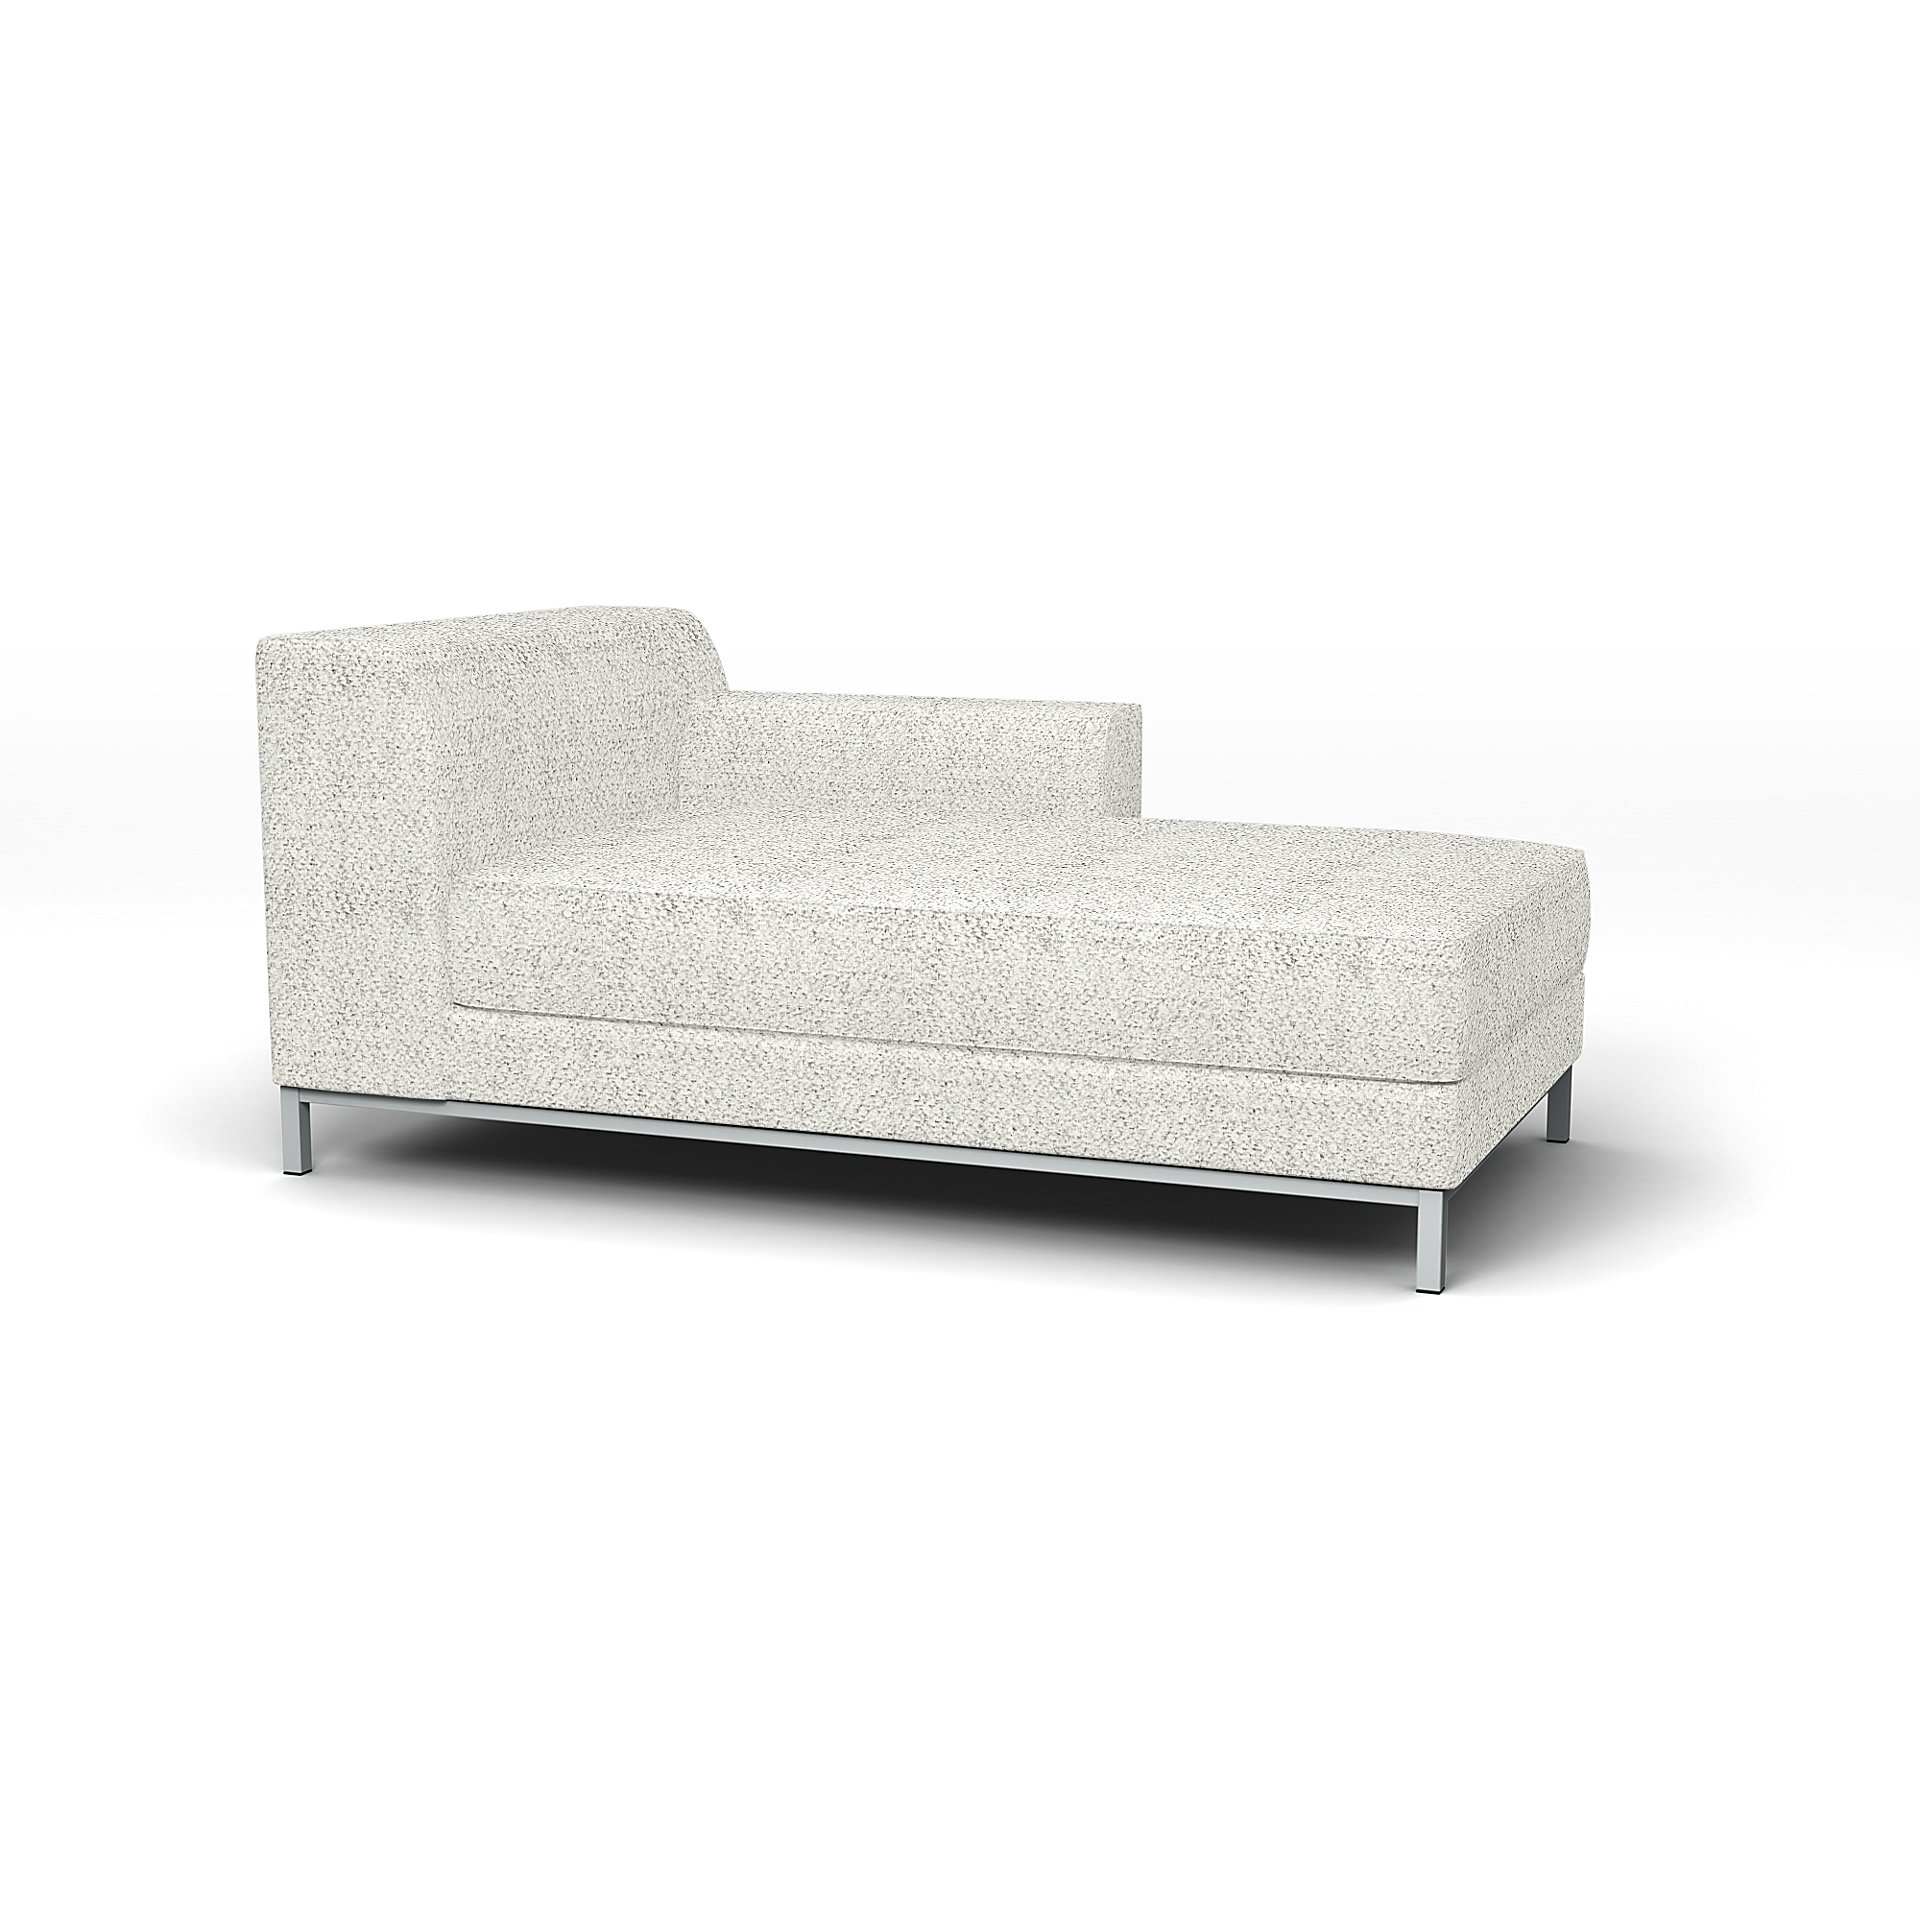 IKEA - Kramfors Chaise Longue with Right Arm Cover, Ivory, Boucle & Texture - Bemz